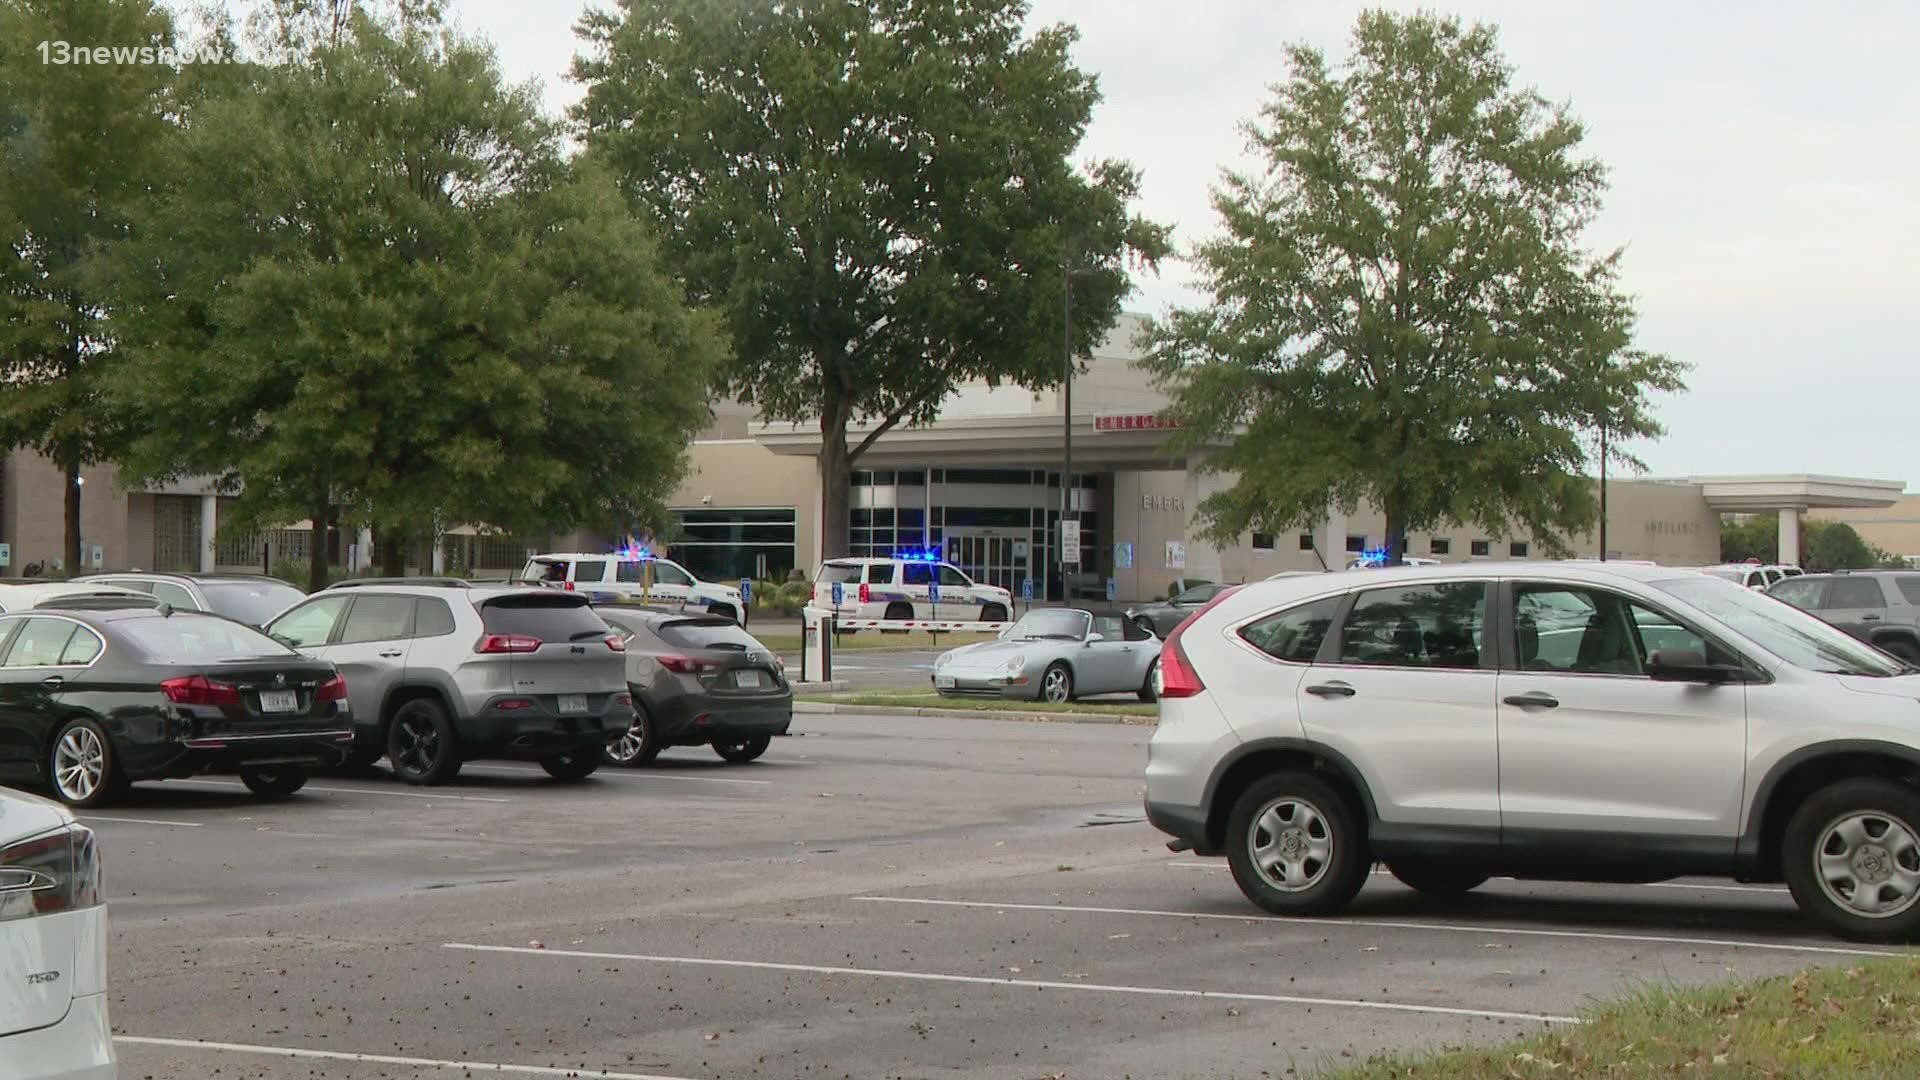 Police say a suspect is in custody after they went to Sentara Virginia Beach General Hospital for an incident Friday afternoon.